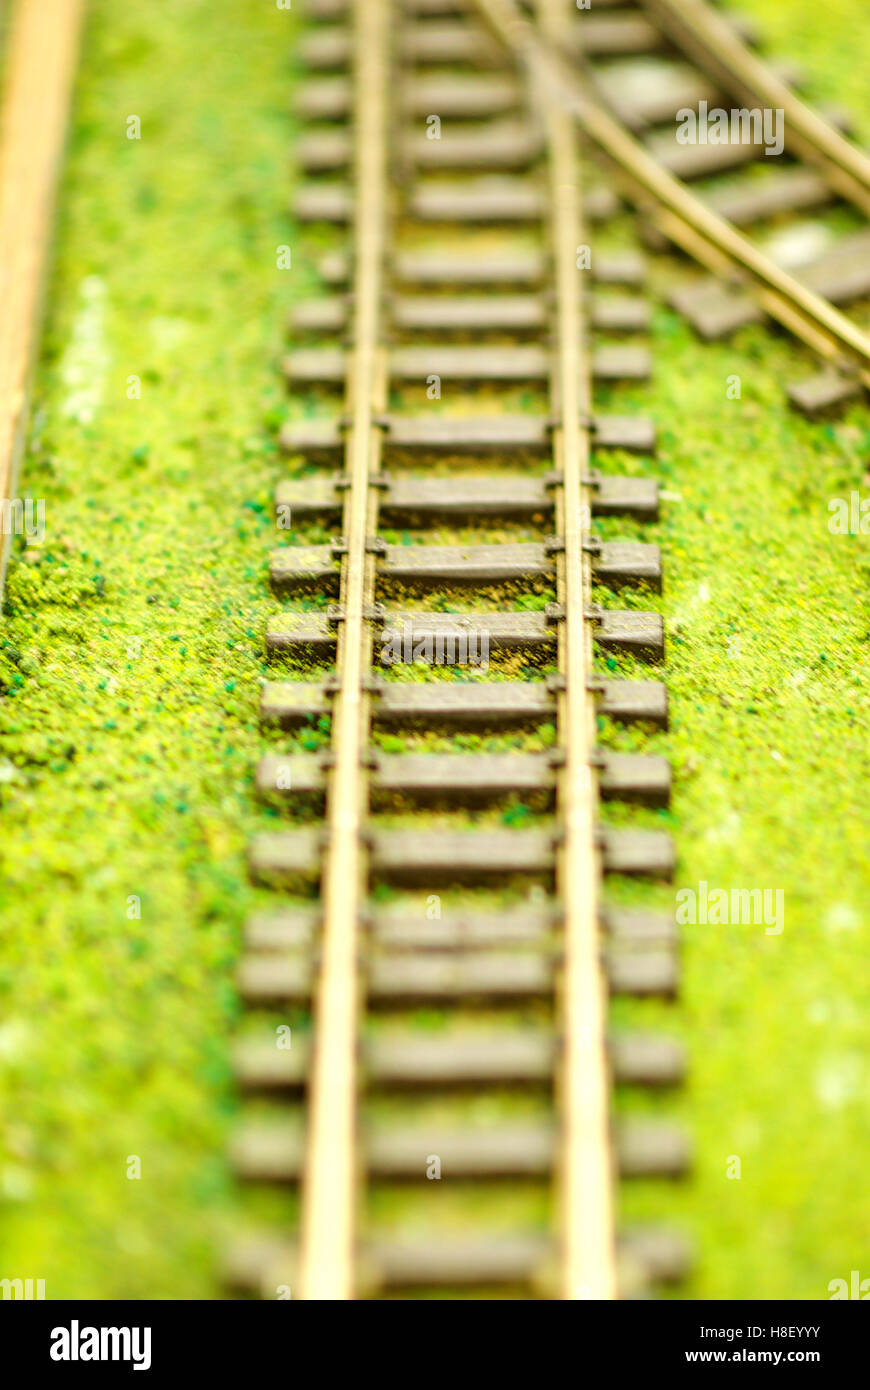 Close-up image of model railroad tracks on fake grass with shallow depth of field. Stock Photo